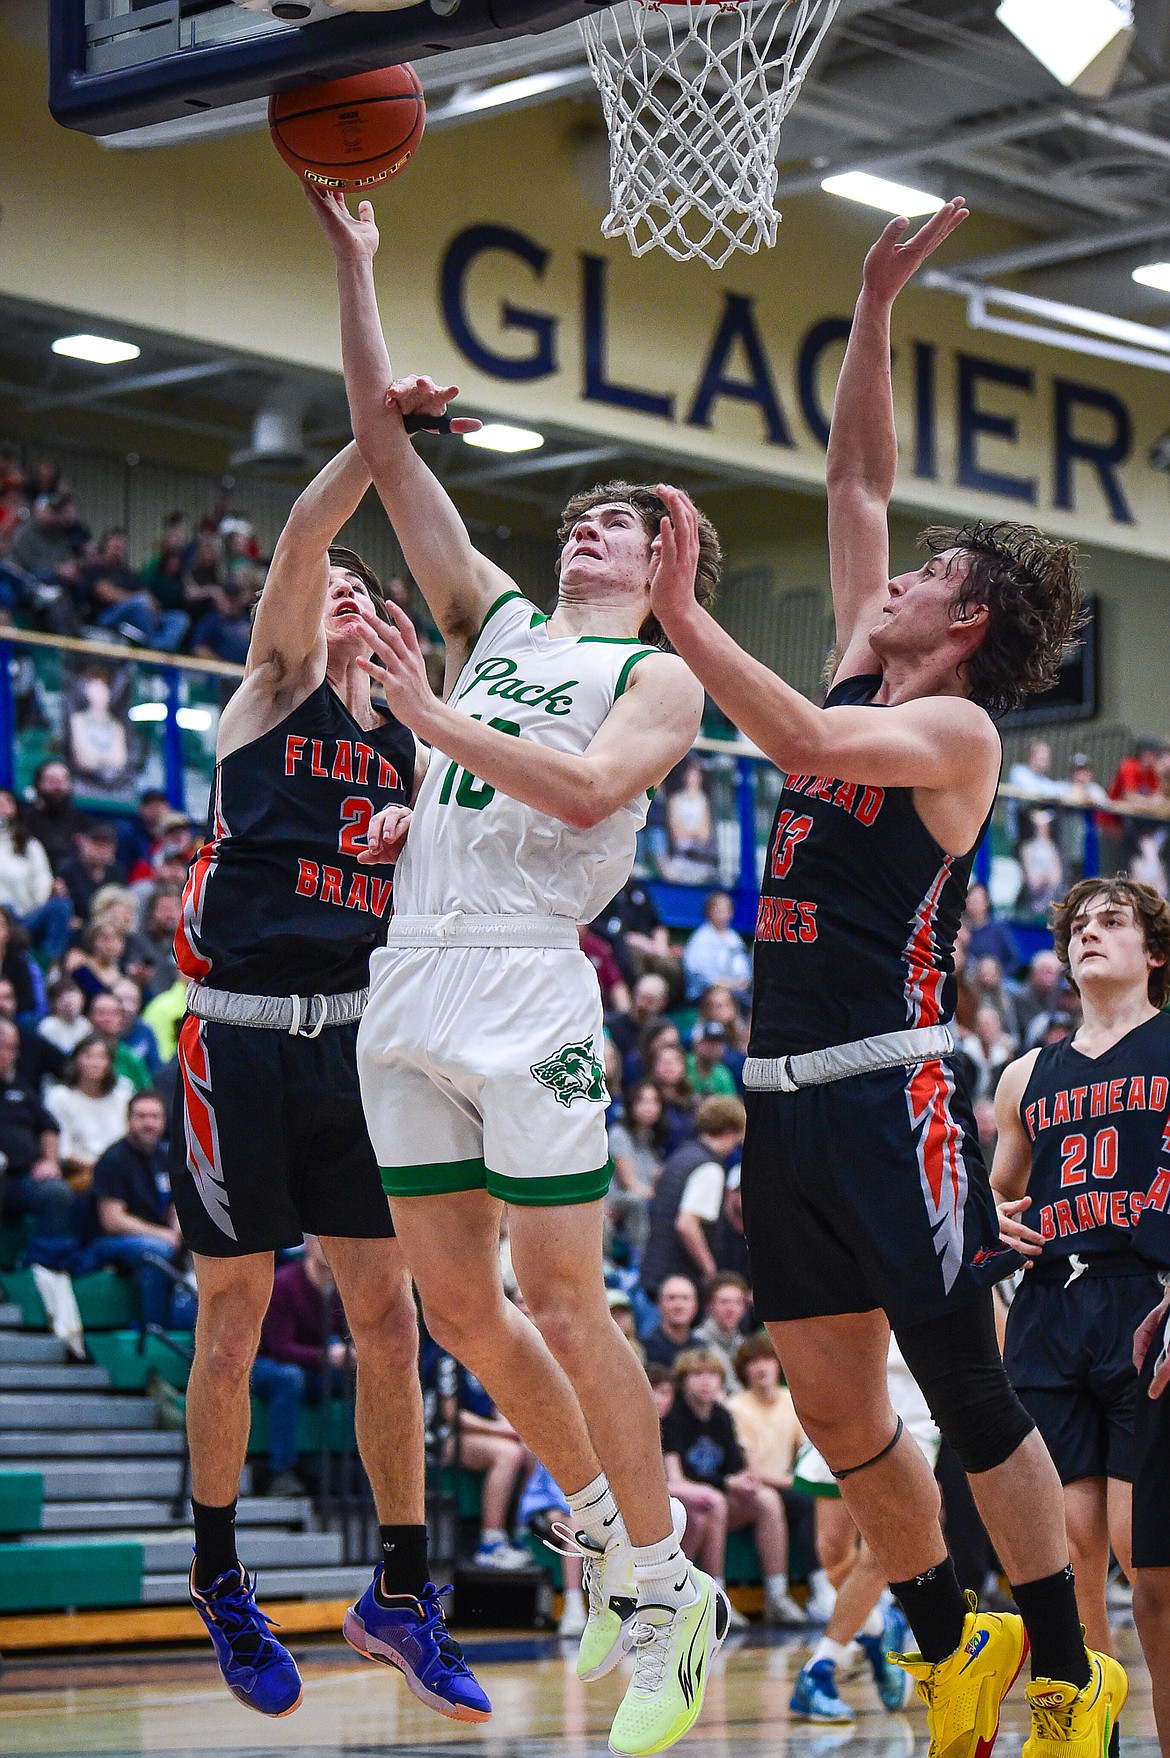 Glacier's Brantly Salmonsen (10) drives to the basket in the first half against Flathead at Glacier High School on Thursday, Feb. 1. (Casey Kreider/Daily Inter Lake)